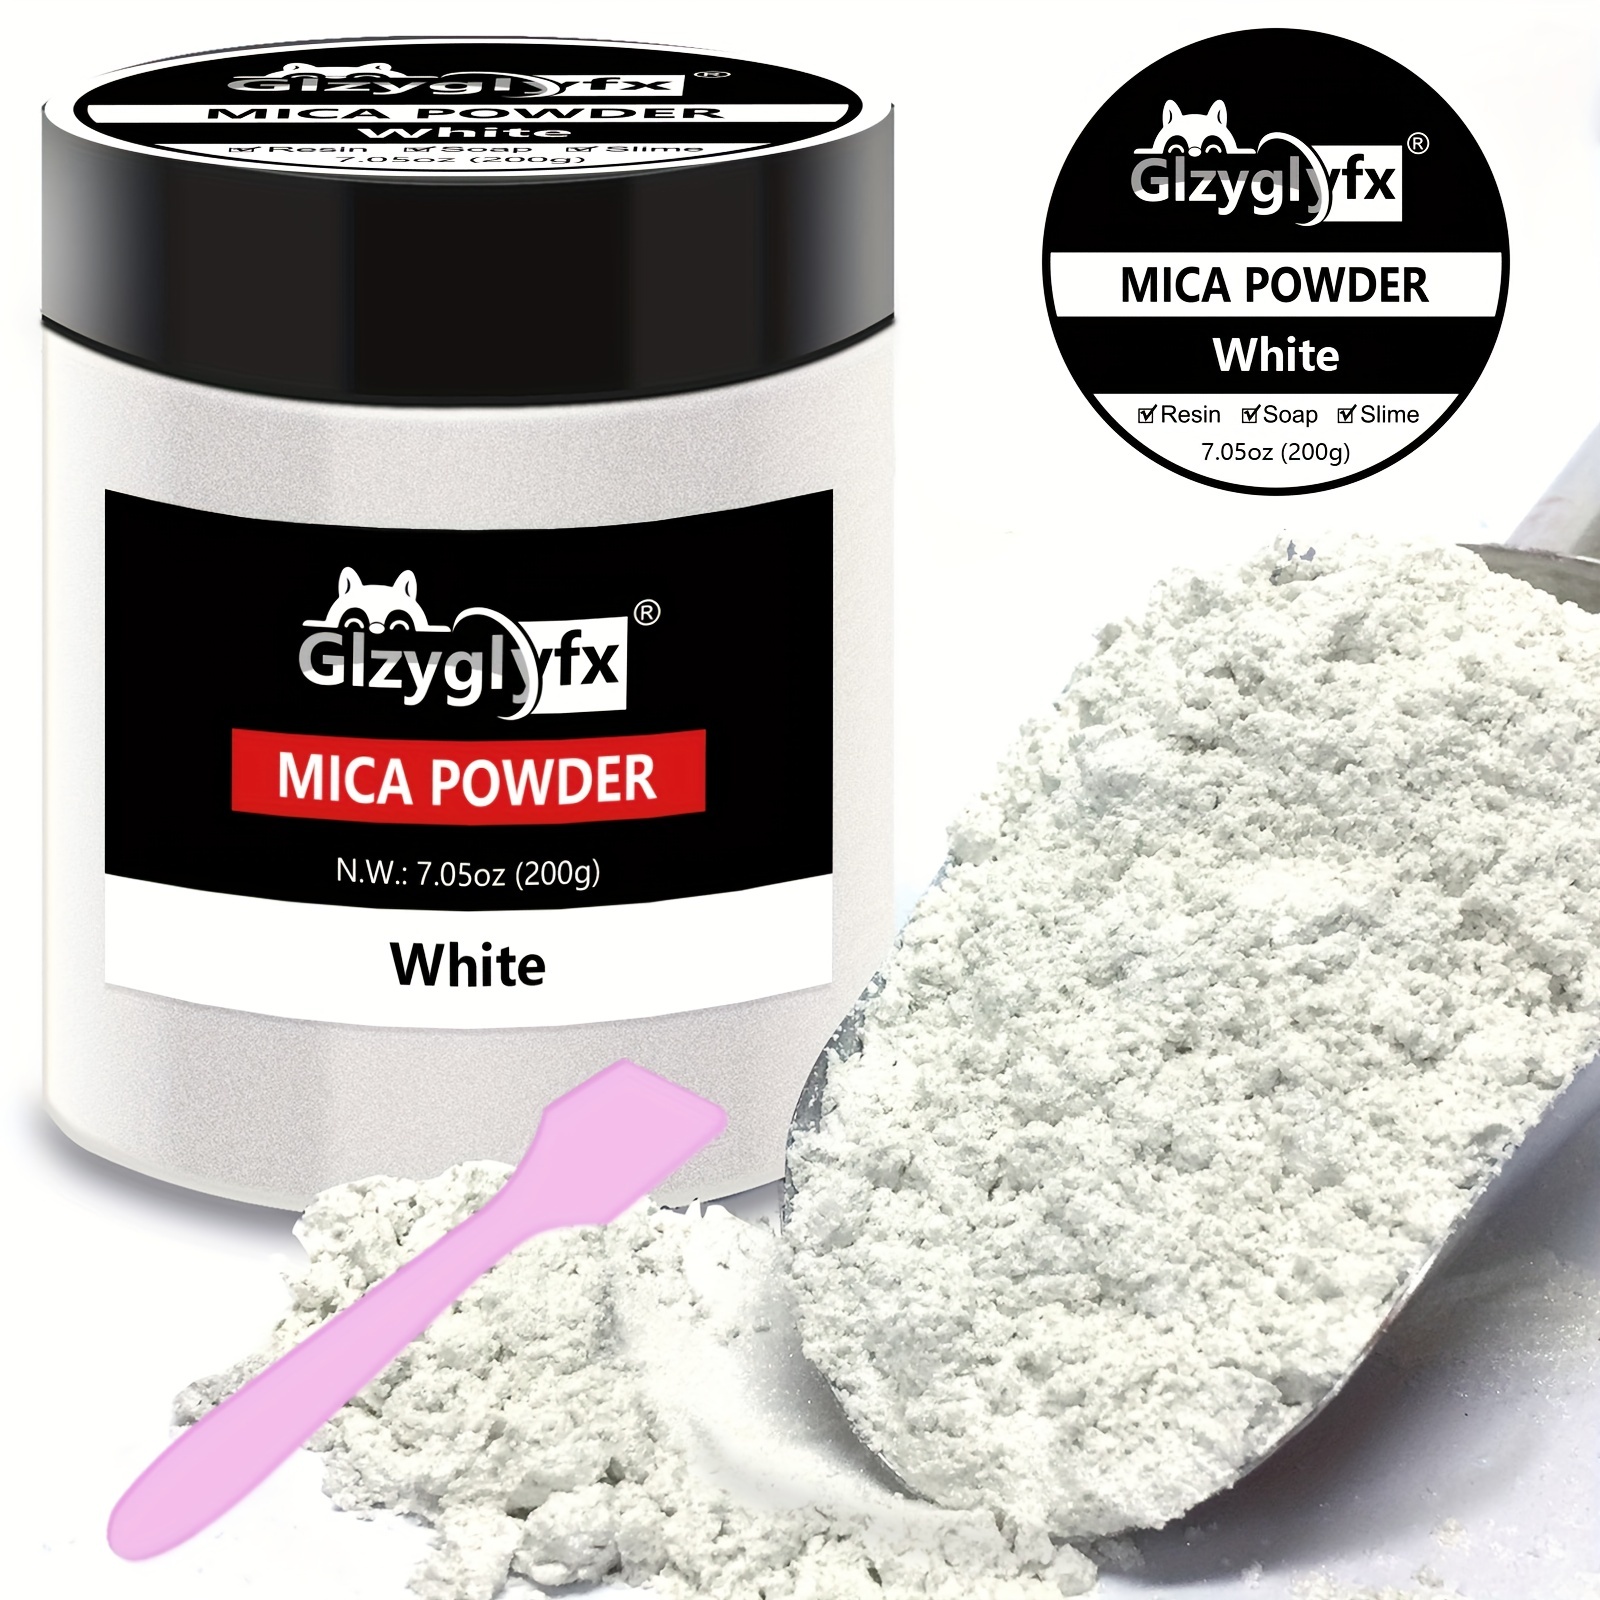 Silver Mica Powder Pigment (100g) -Cosmetic Grade Metallic Mica Powder for  Epoxy Resin, Lip Gloss, Soap,Candle Making,Bath Bombs,Tumblers, Jewelry